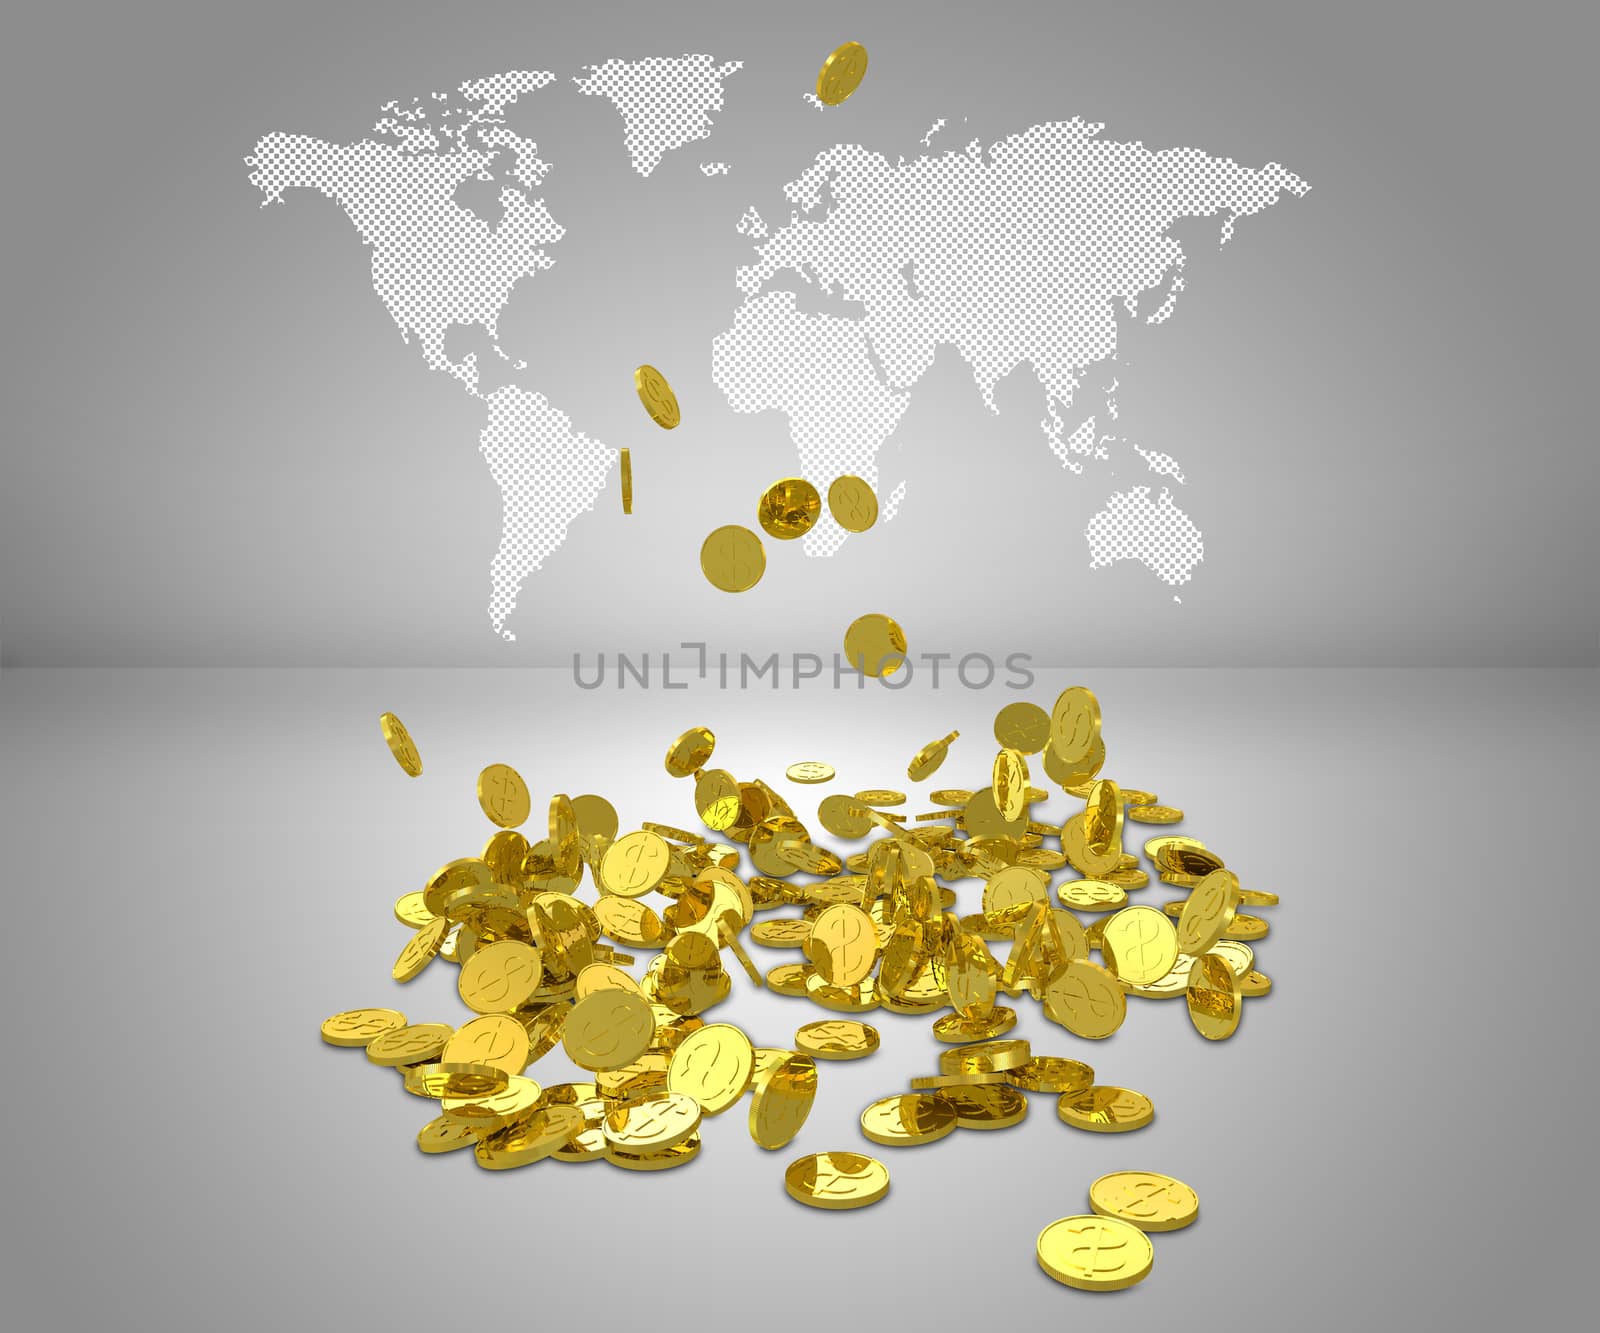 Gold dollars fall to floor. World map on background